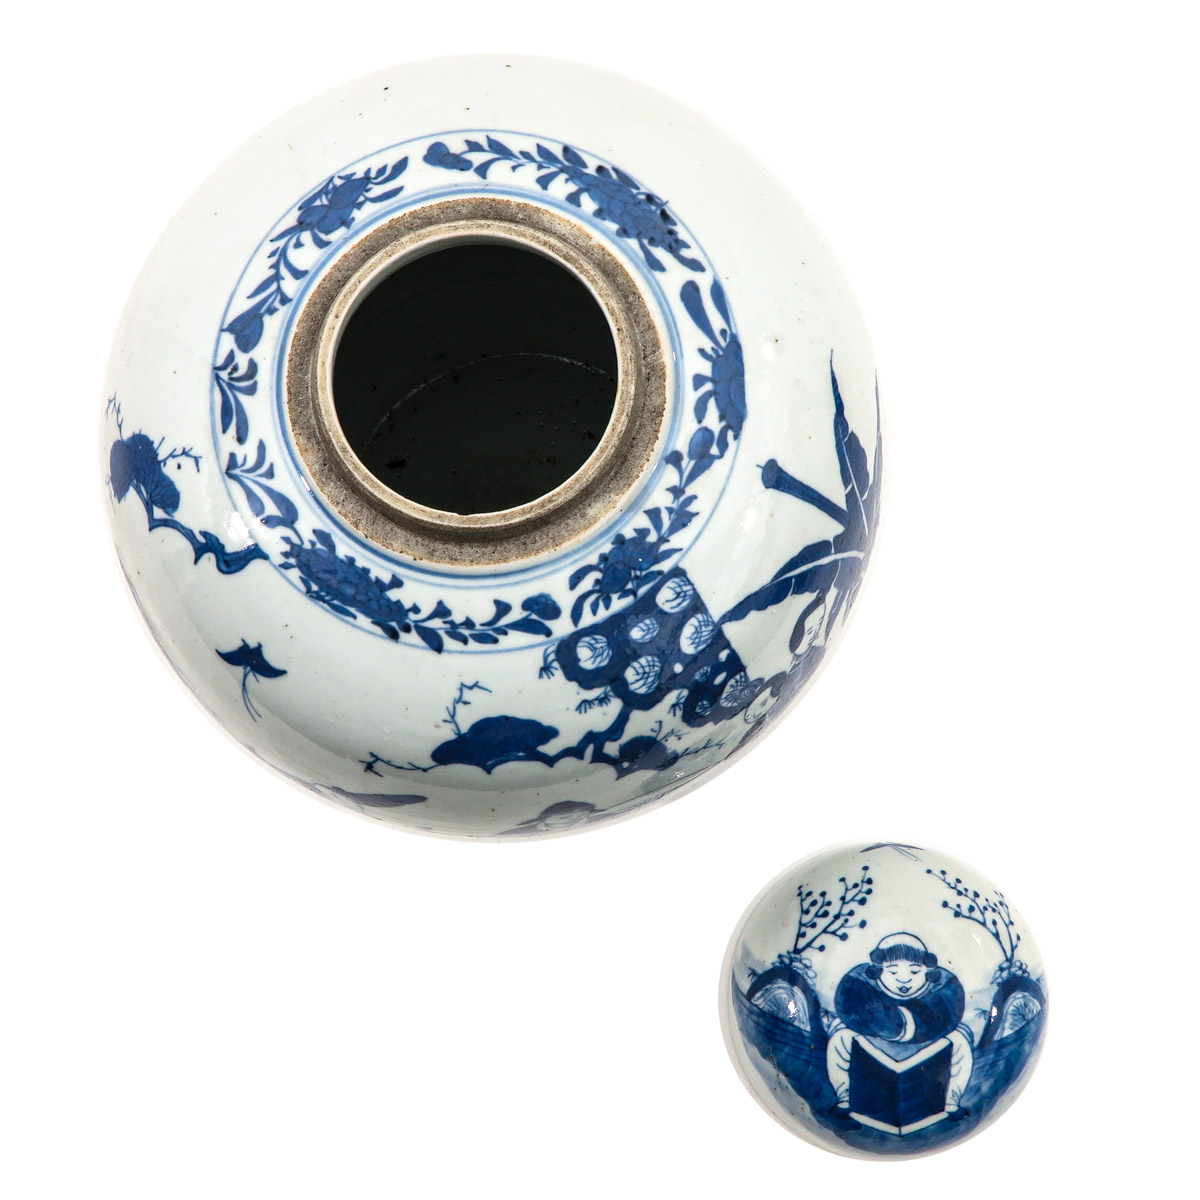 A Blue and White Ginger Jar - Image 5 of 10